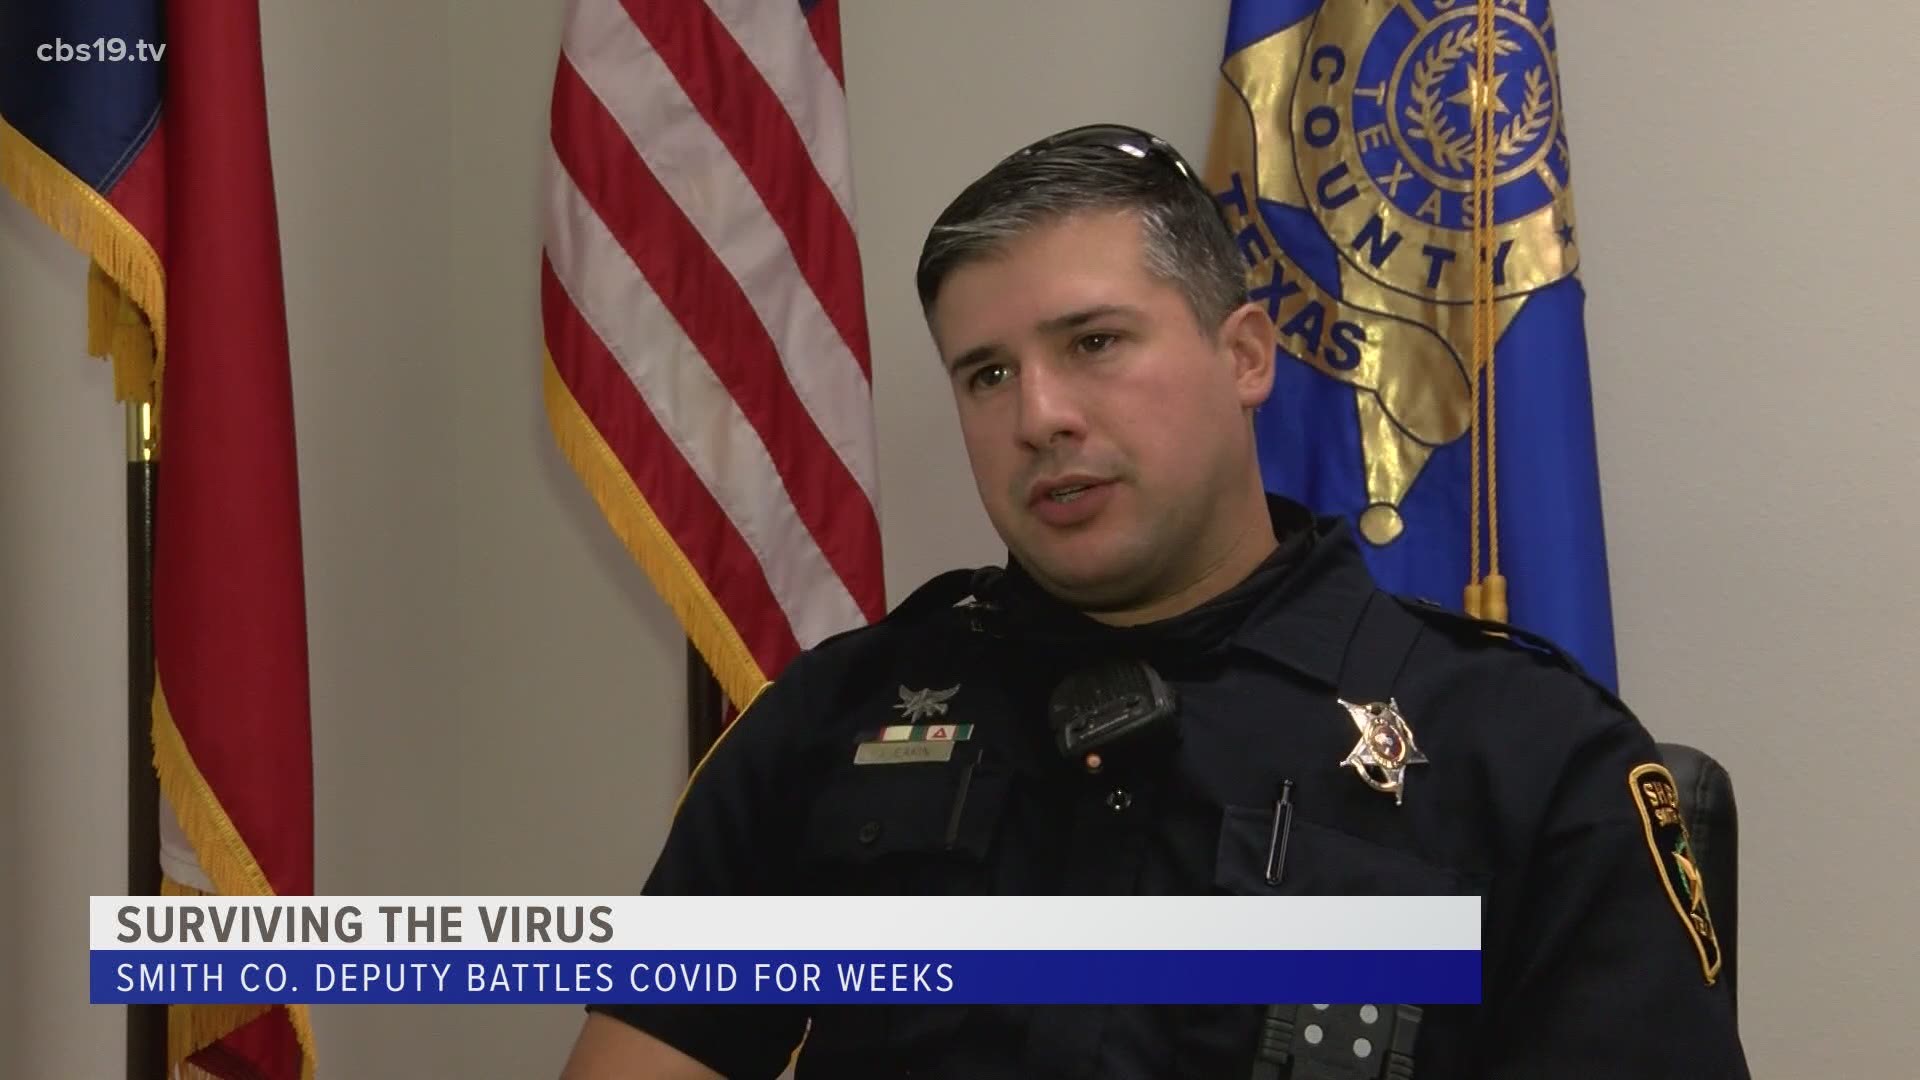 Smith County Deputy, Justin Eakin is a COVID-19 survivor. He was with the virus at the beginning of September.